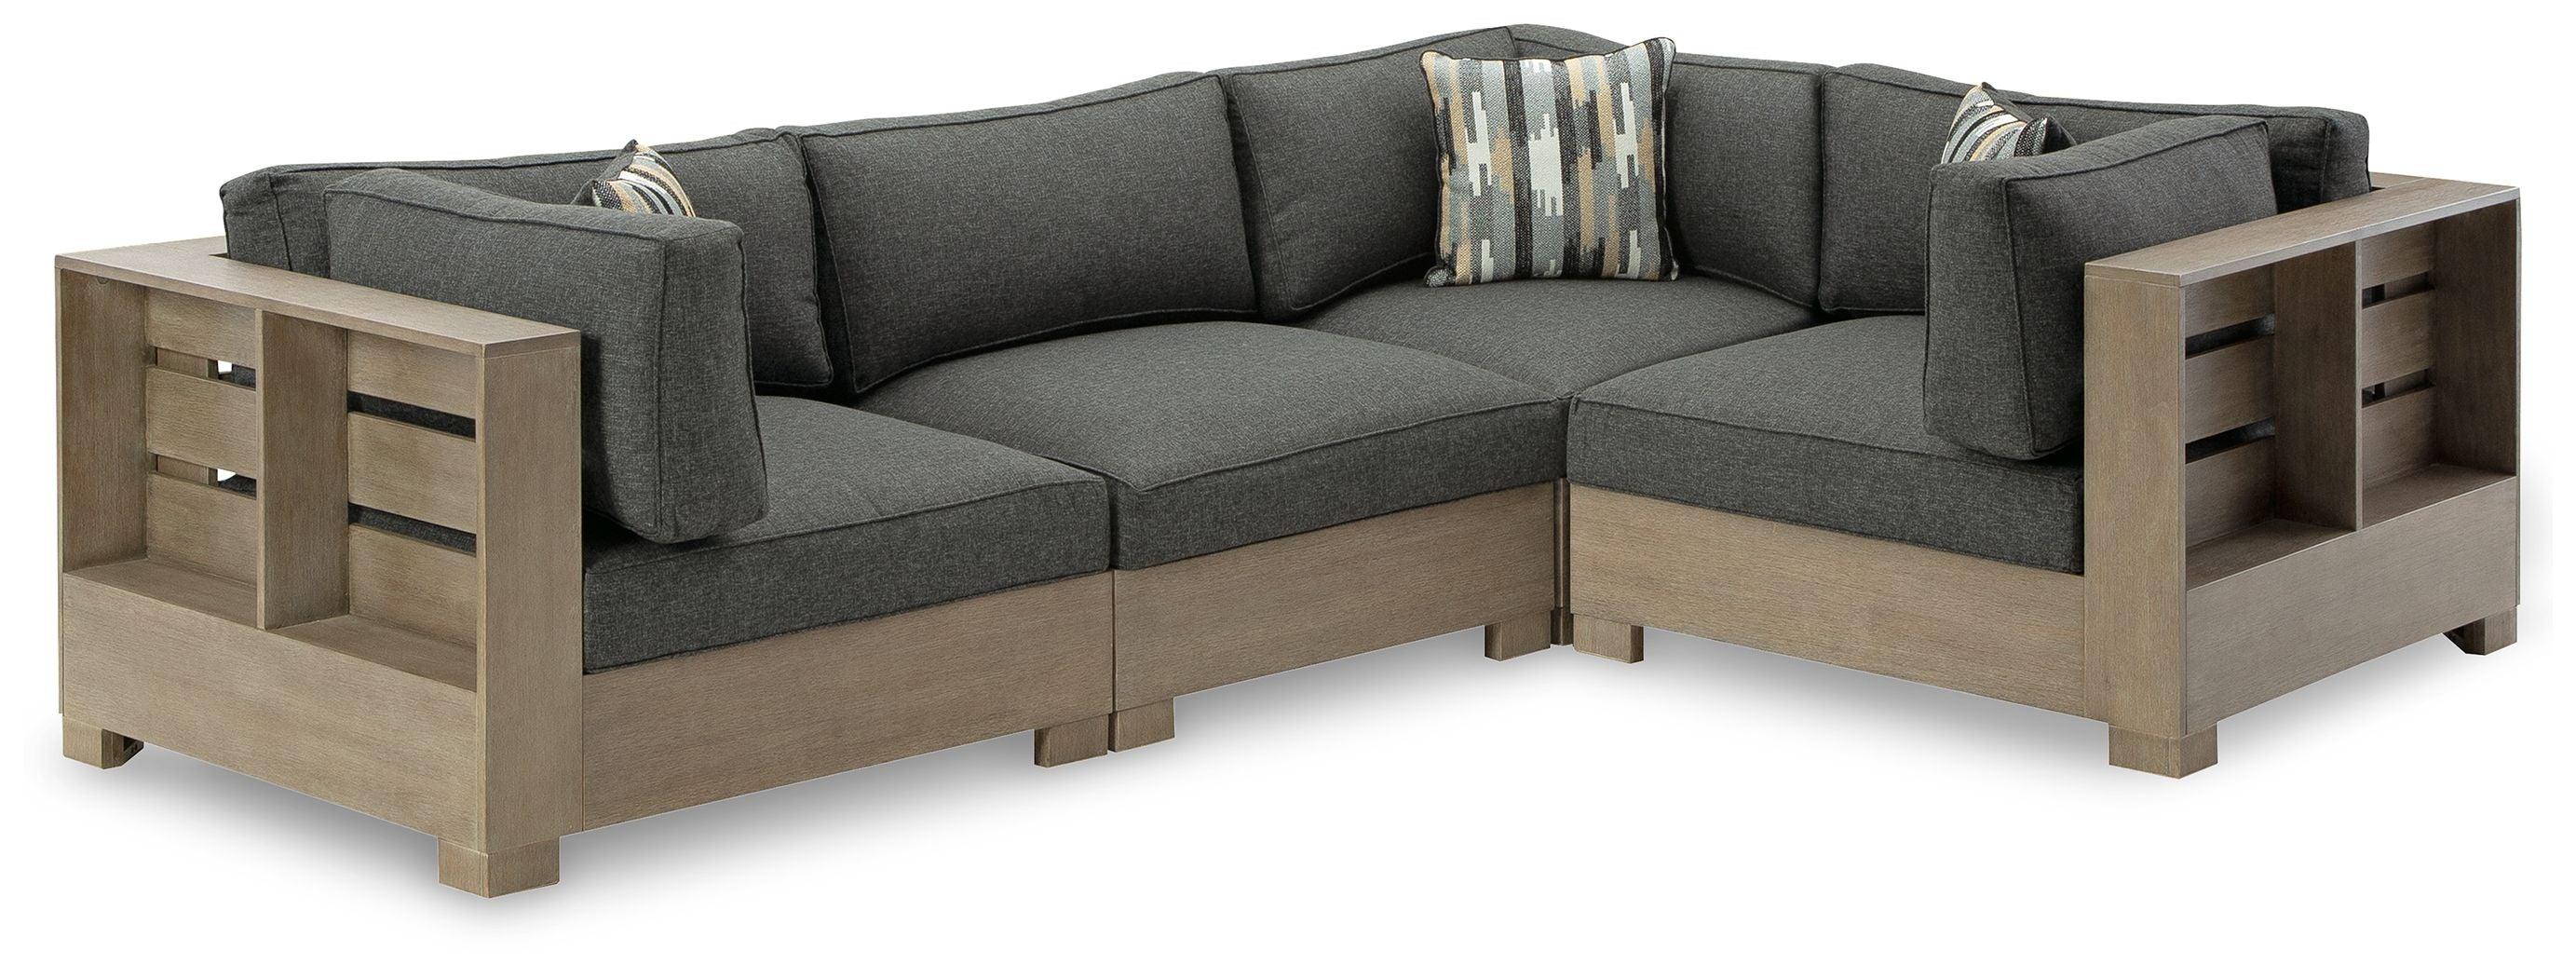 Signature Design by Ashley® - Citrine Park - Brown - 4-Piece Outdoor Sectional - 5th Avenue Furniture